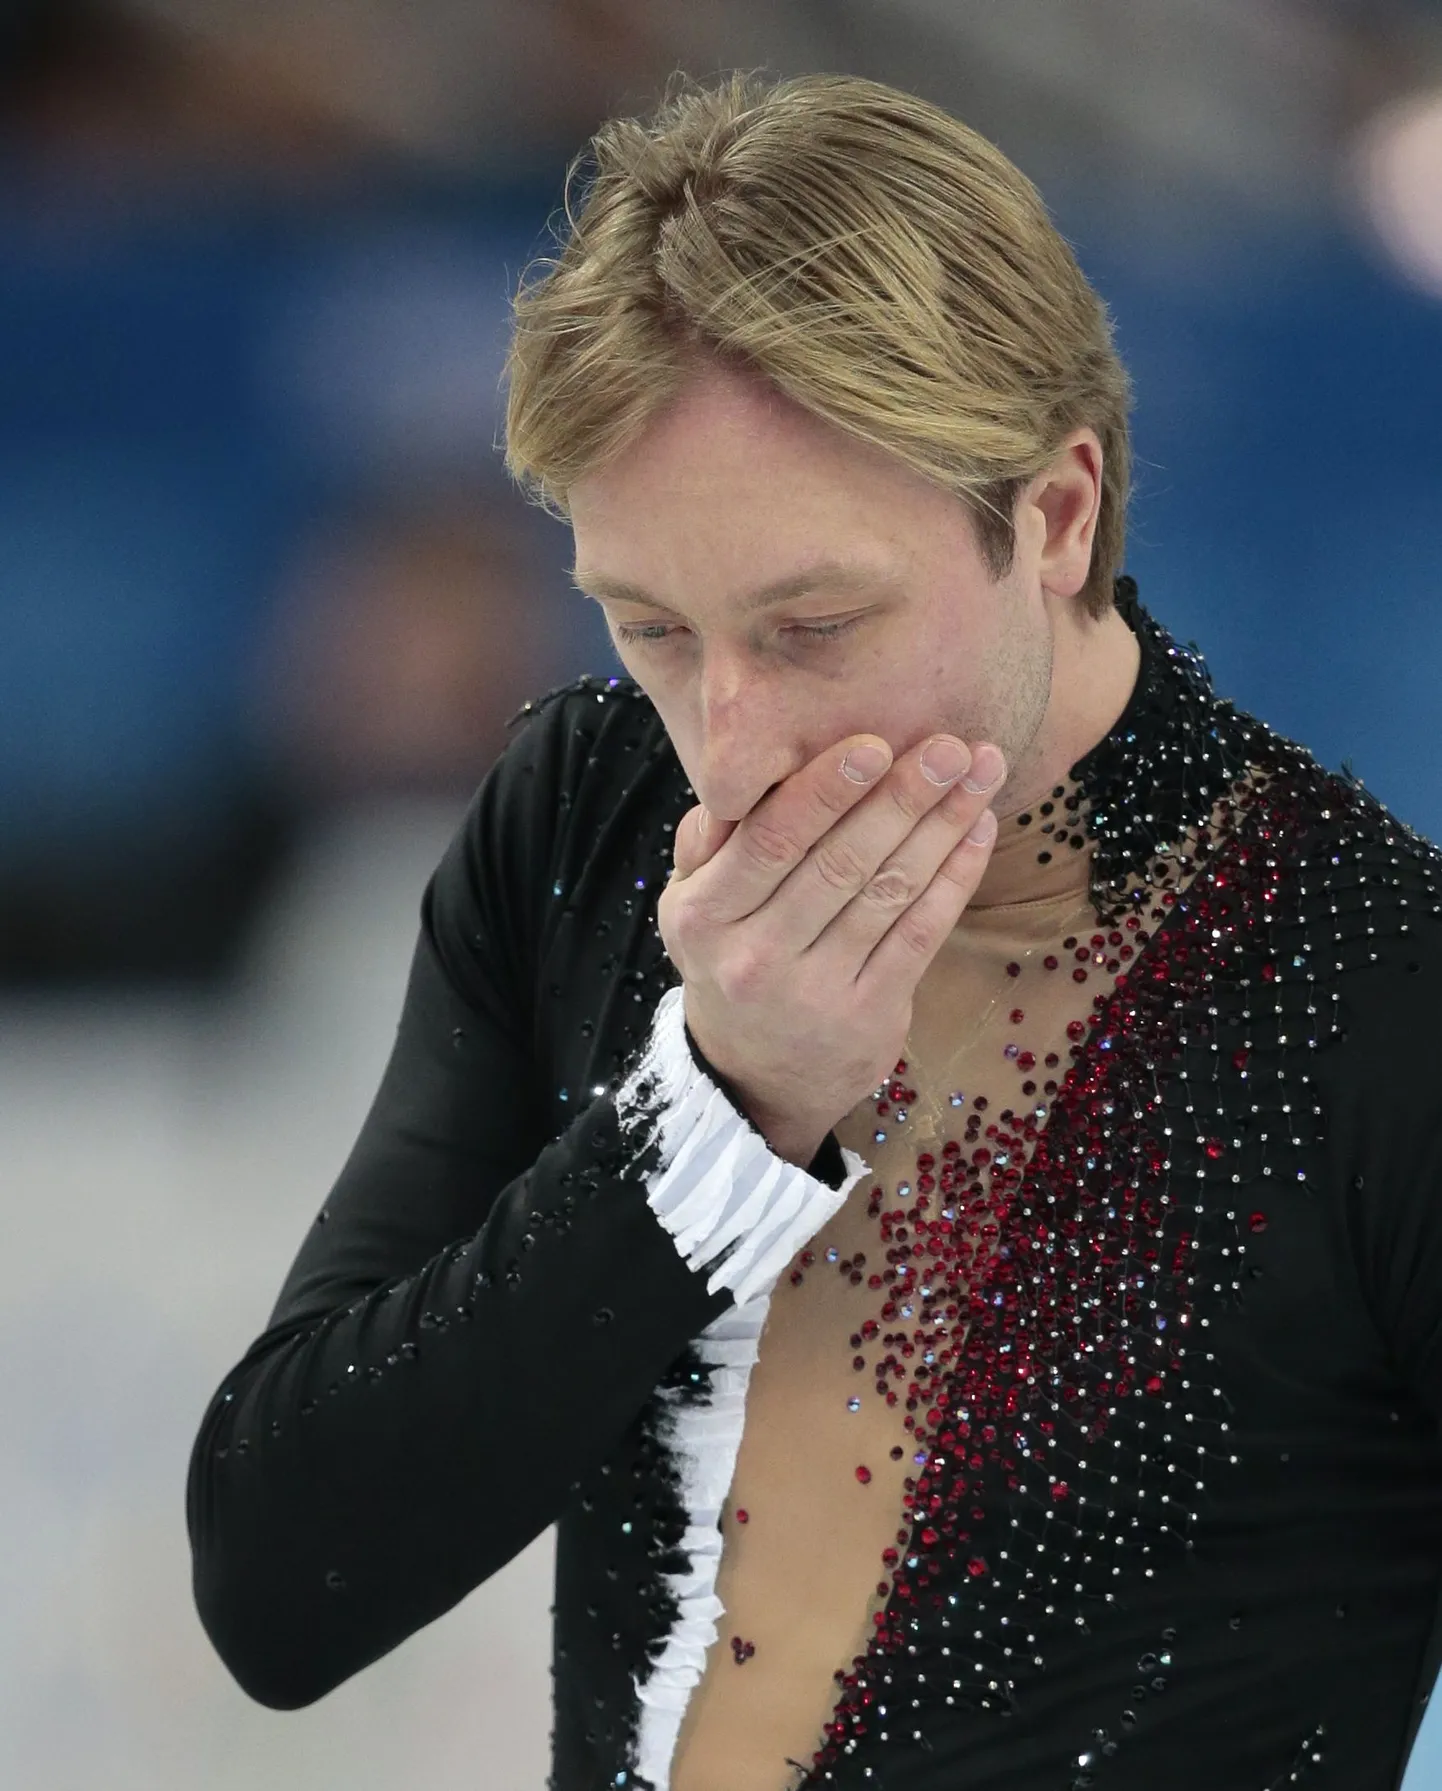 Evgeni Plushenko of Russia leaves the ice after pulling out of the men's short program figure skating competition due to illness at the Iceberg Skating Palace during the 2014 Winter Olympics, Thursday, Feb. 13, 2014, in Sochi, Russia. (AP Photo/Ivan Sekretarev) / TT / kod 436